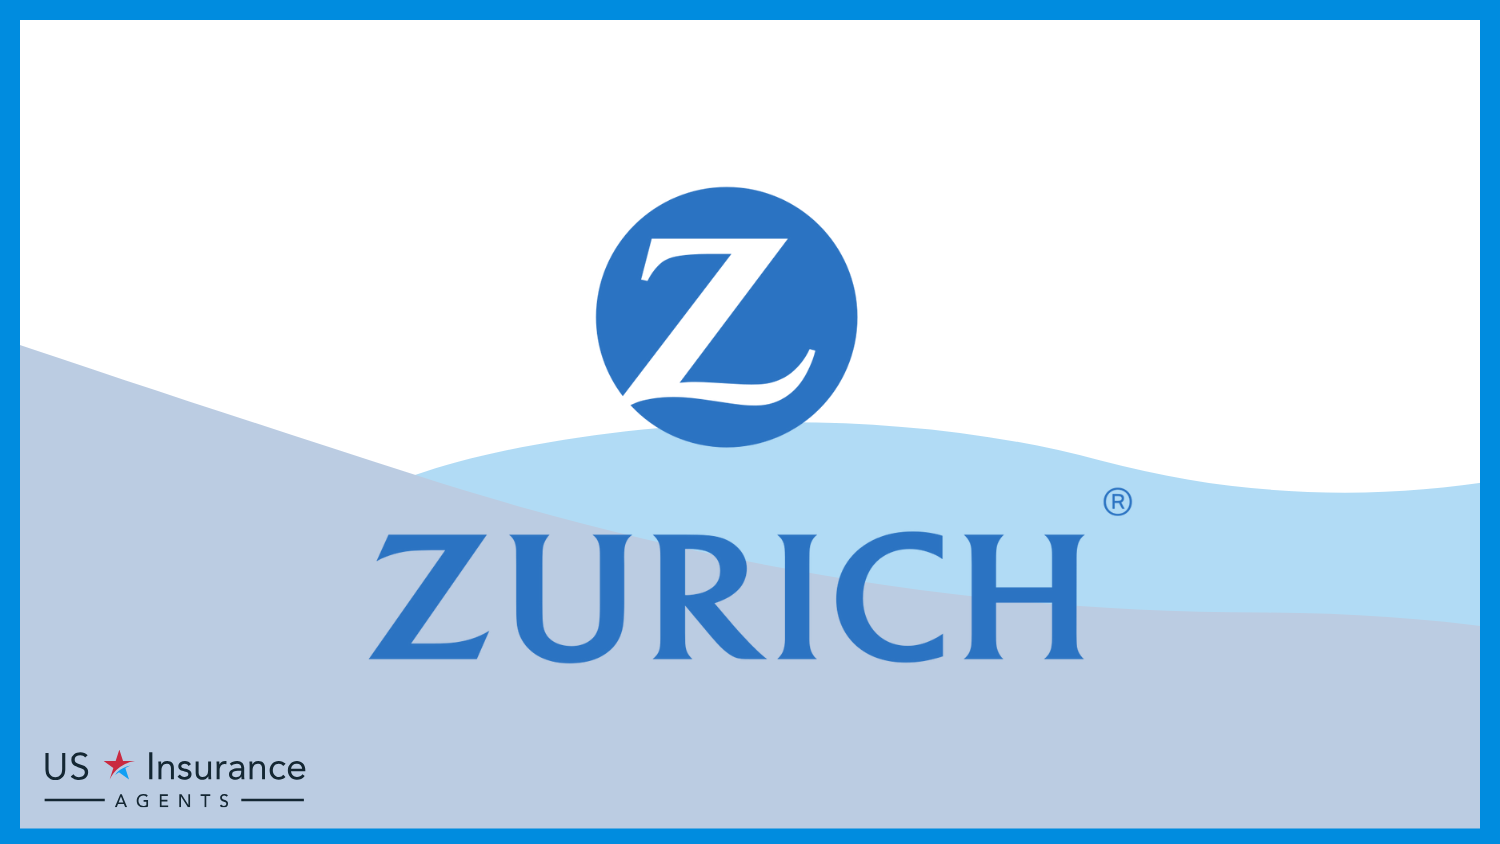 Zurich: Best Business Insurance Companies for Museums